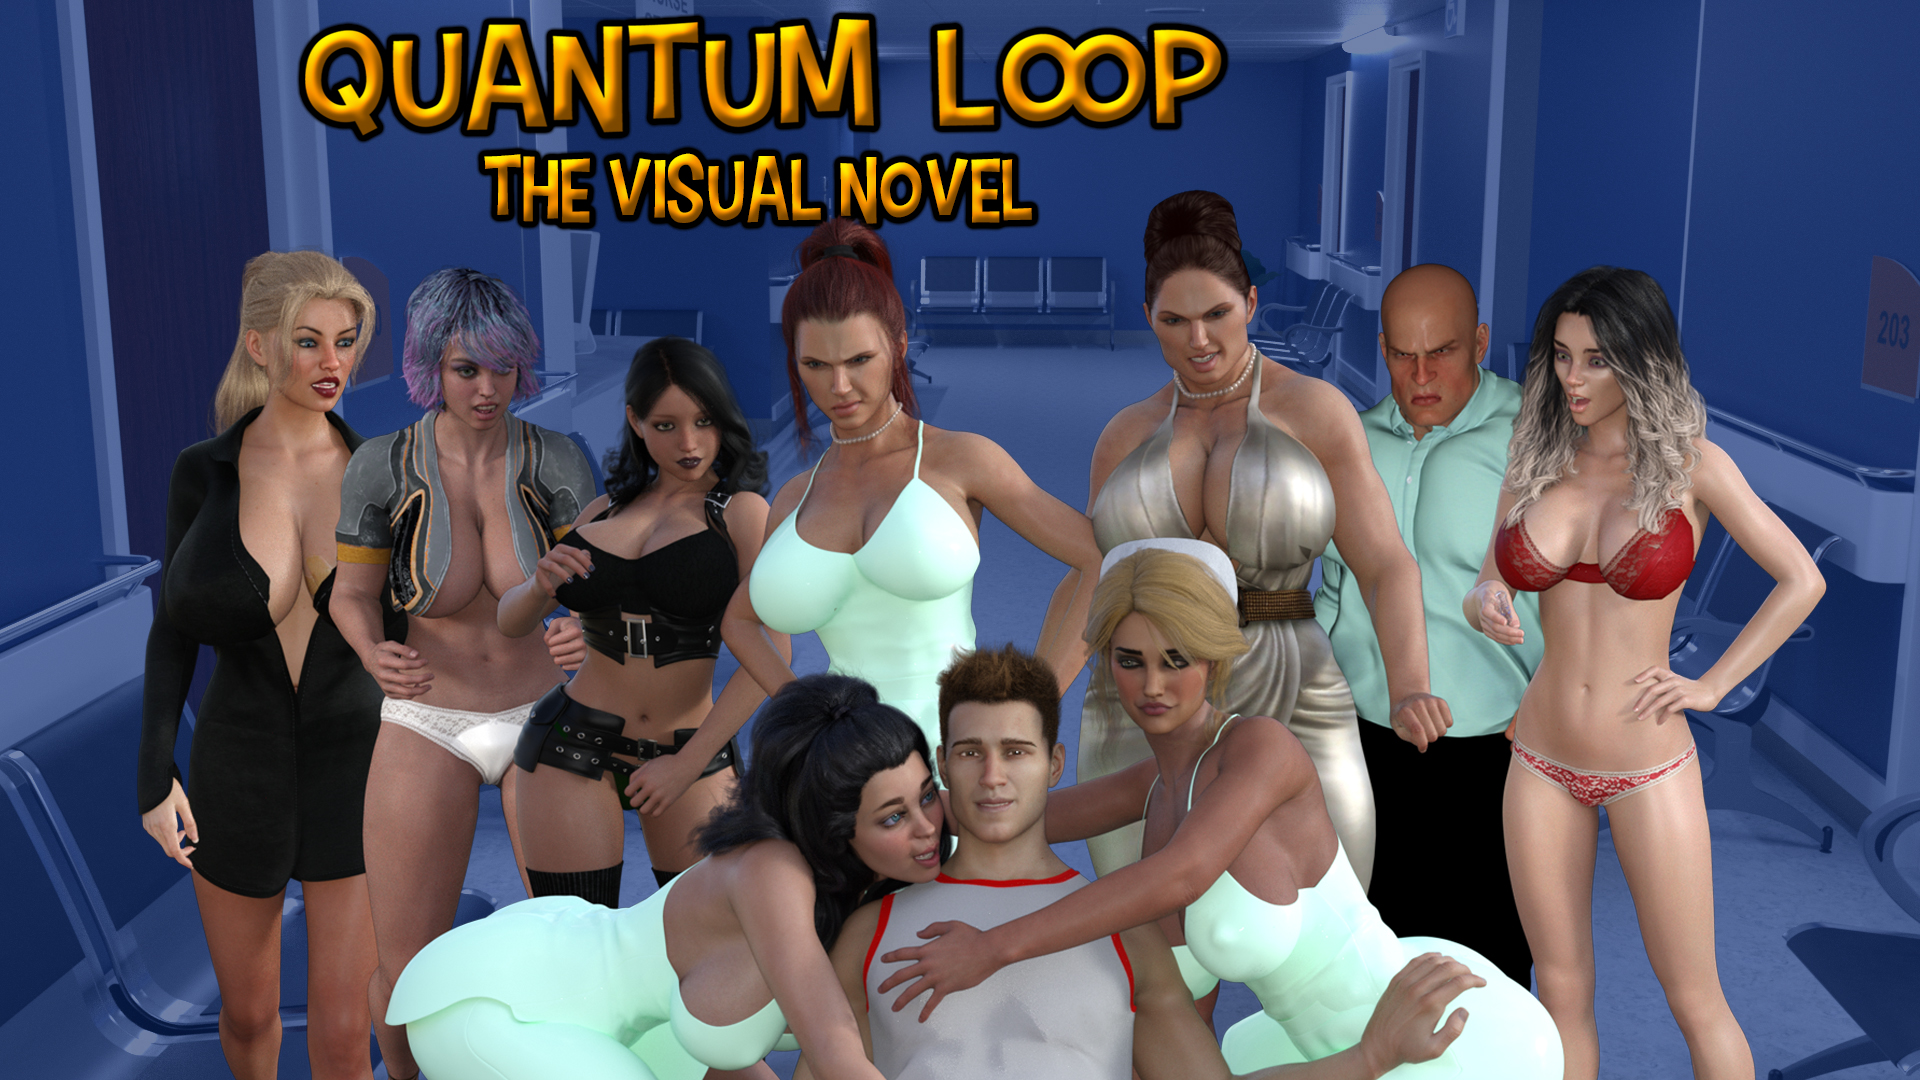 QuantumLoop - A Time Travel Story